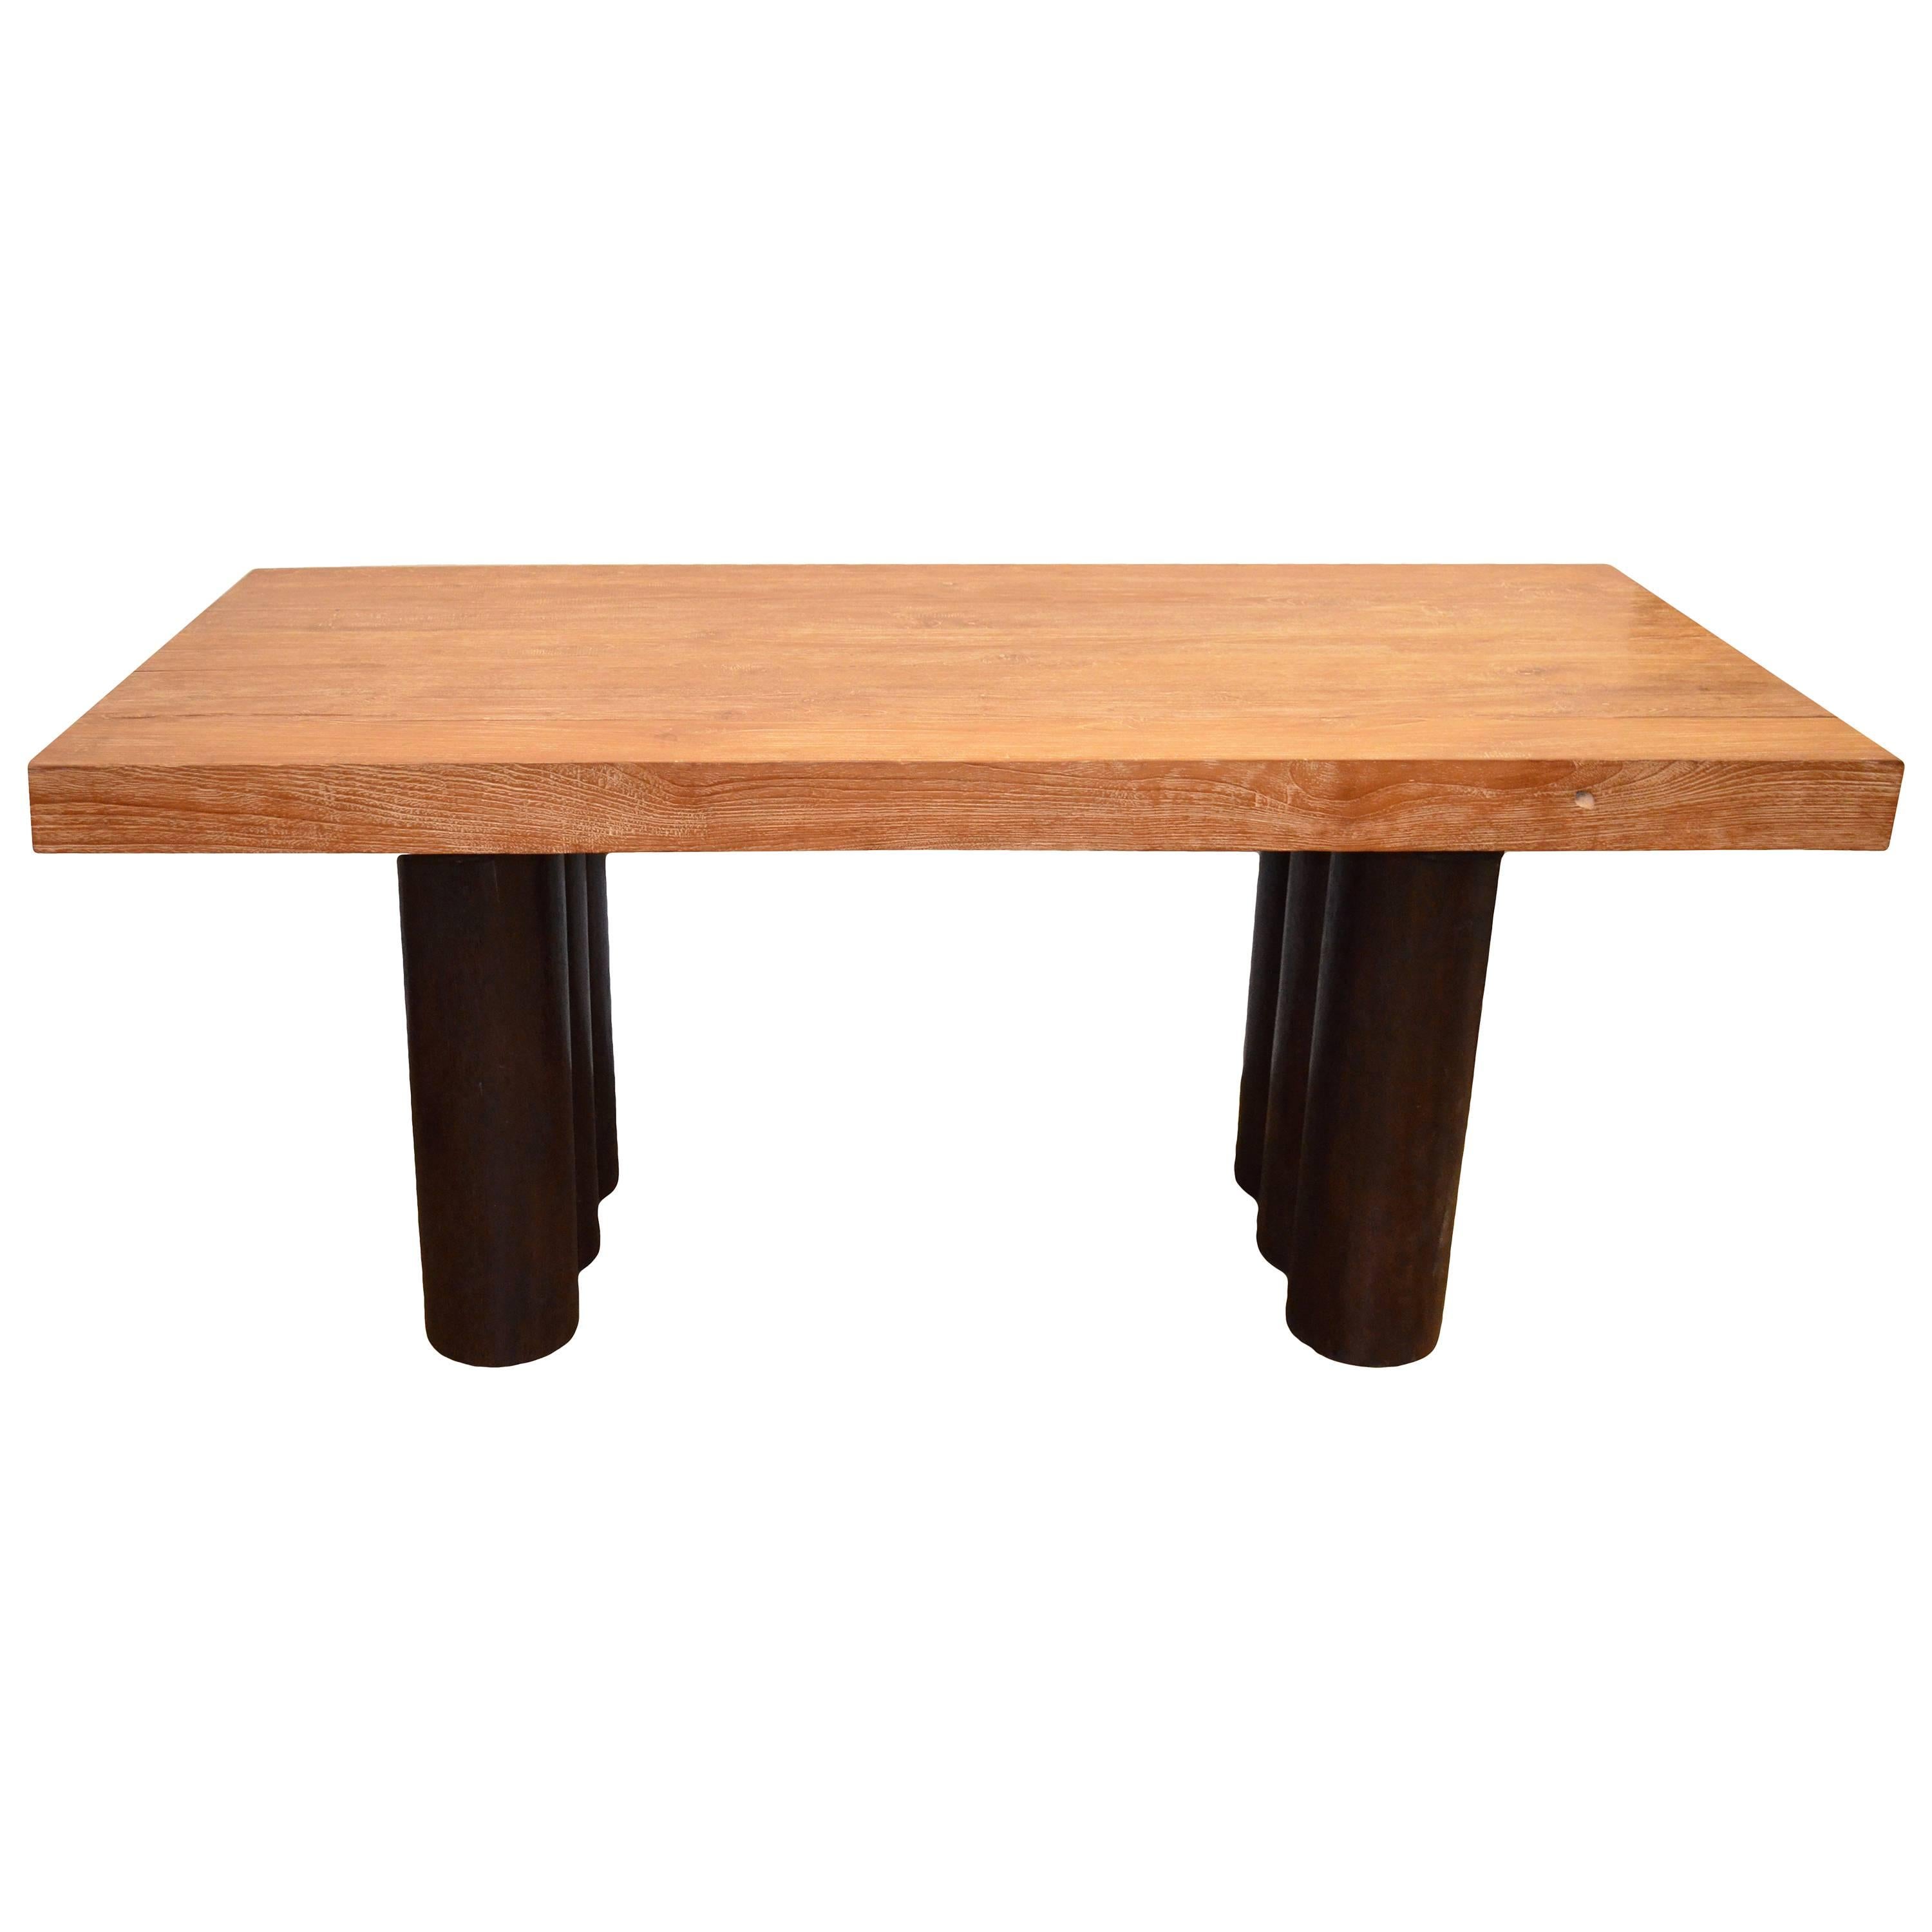 Andrianna Shamaris Cerused Teak Wood Table with Contrasting Coconut Wood Base For Sale